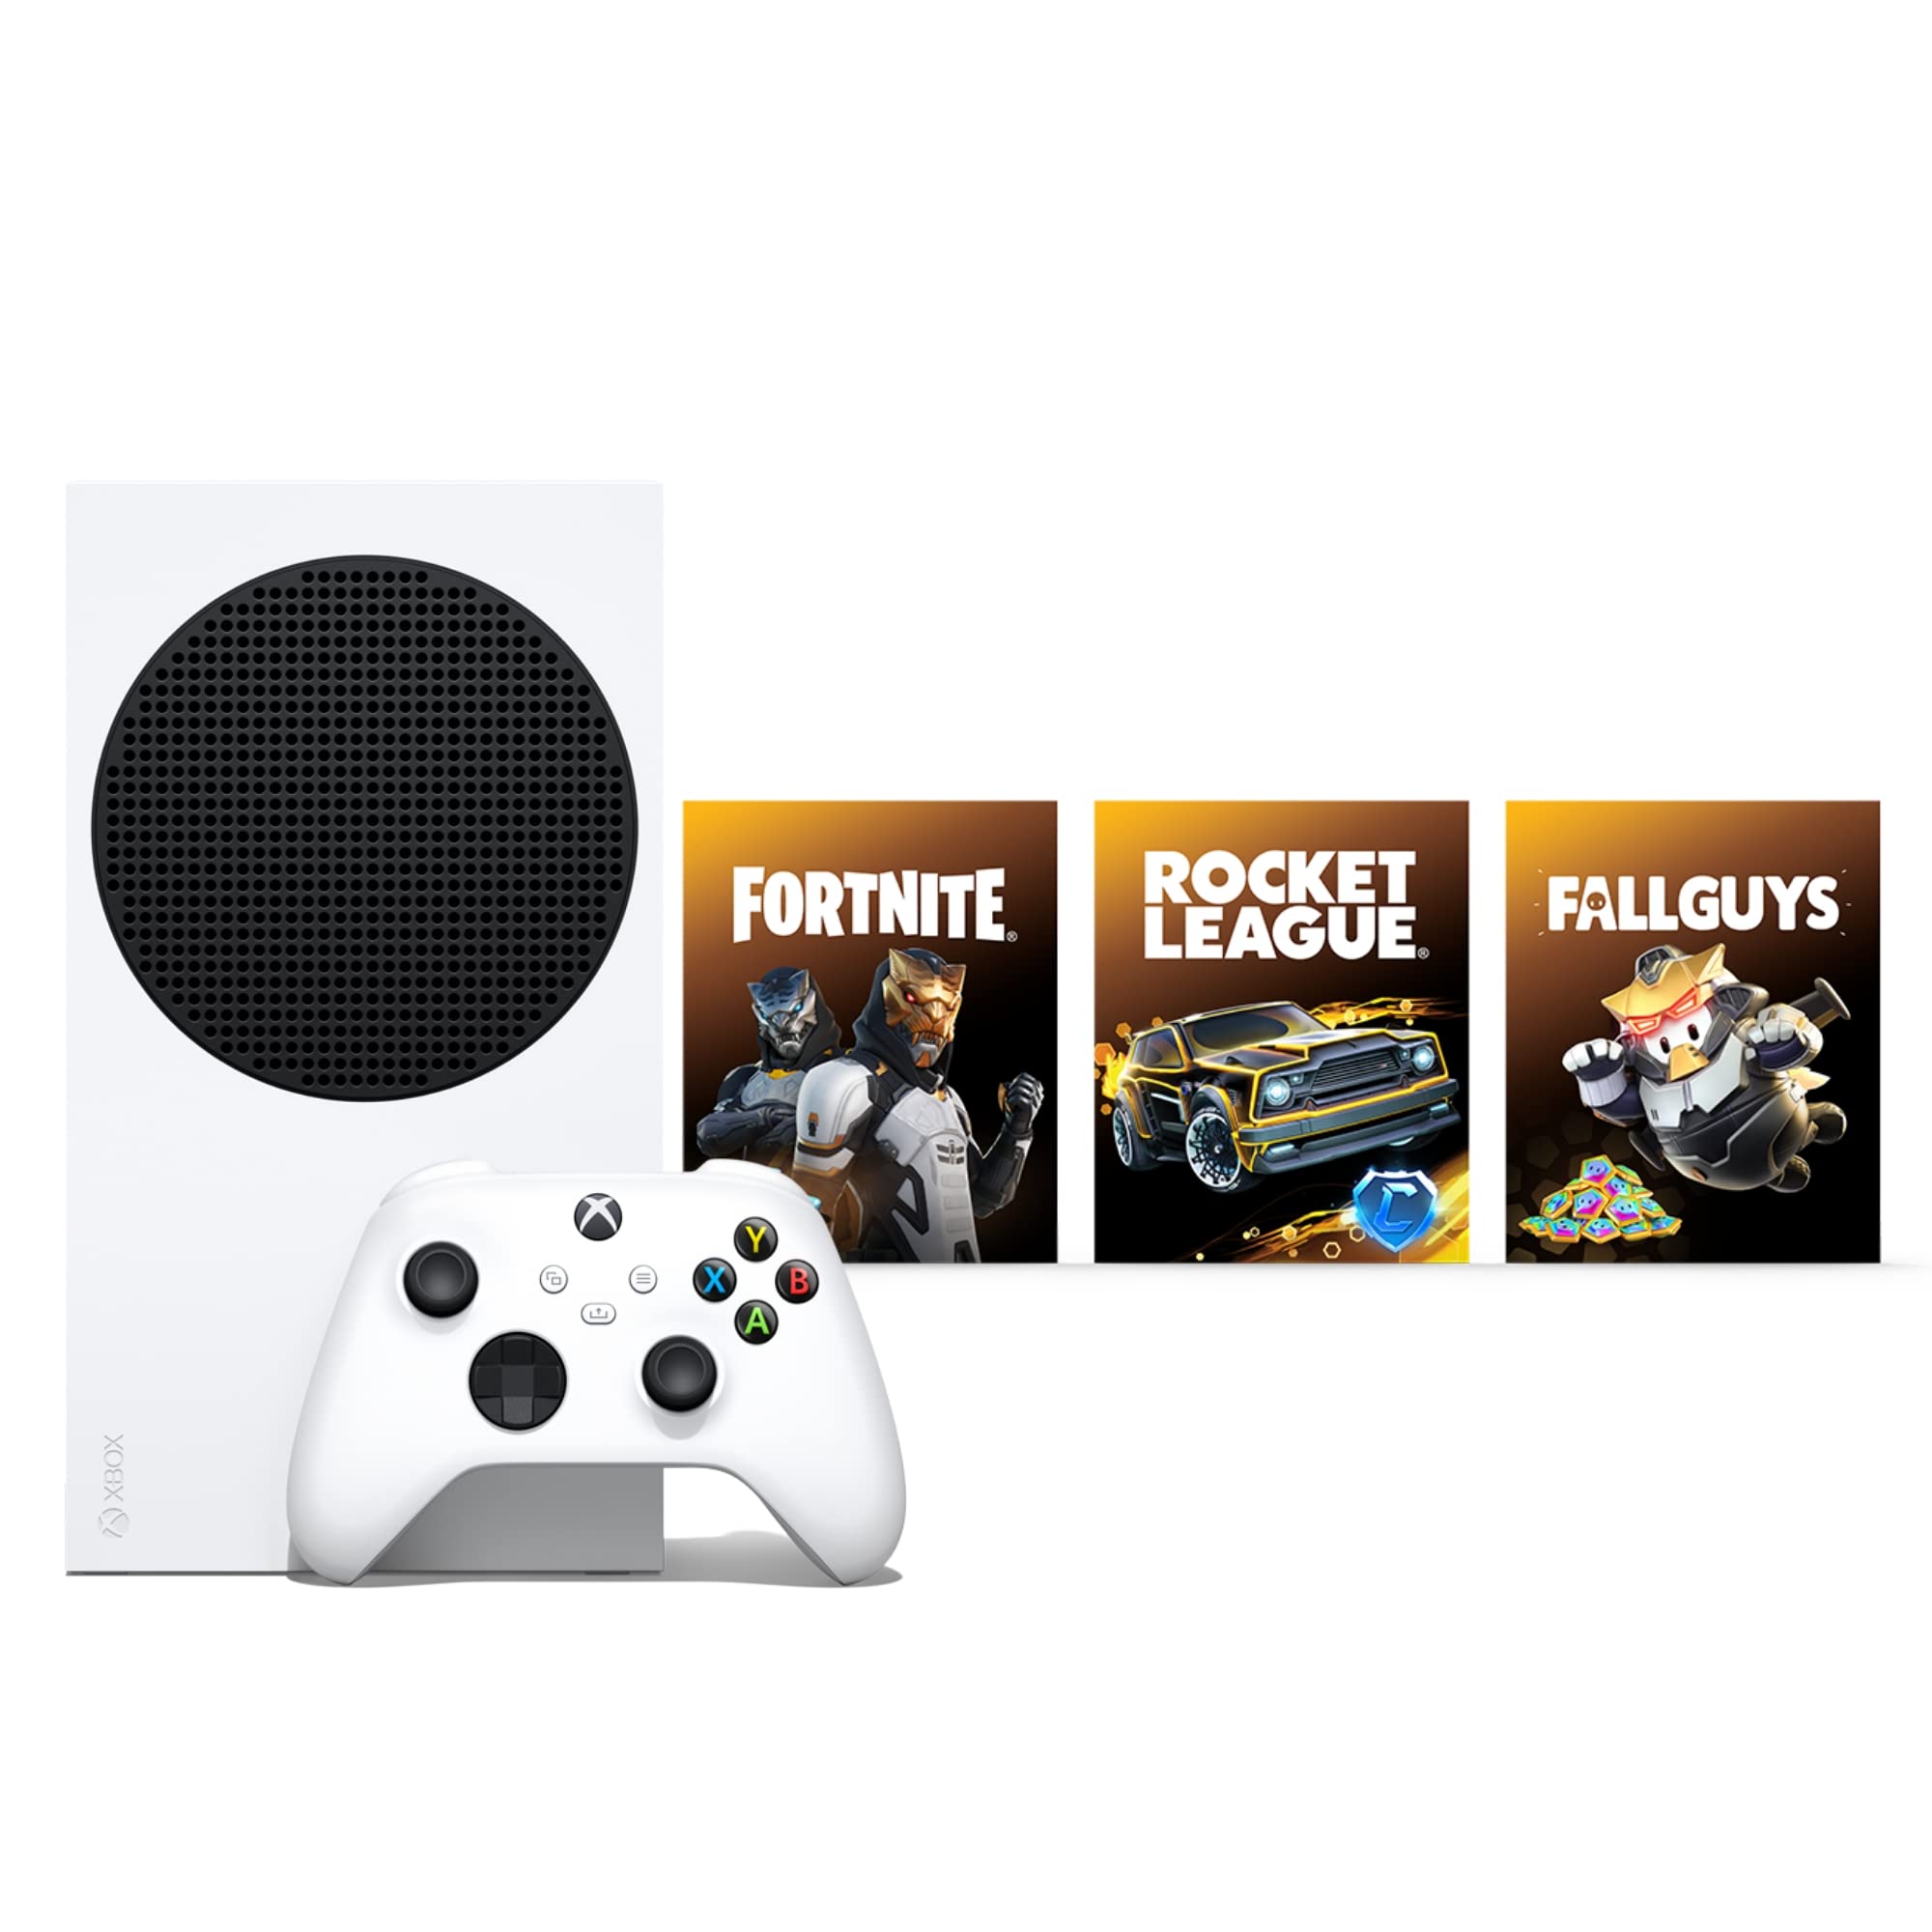 Xbox Series S – Gilded Hunter Bundle – In-game cosmetics for Fortnite, Rocket League, Fall Guys – 512GB All-Digital Gaming Console – 1440p Gaming – 4K Streaming – Robot White